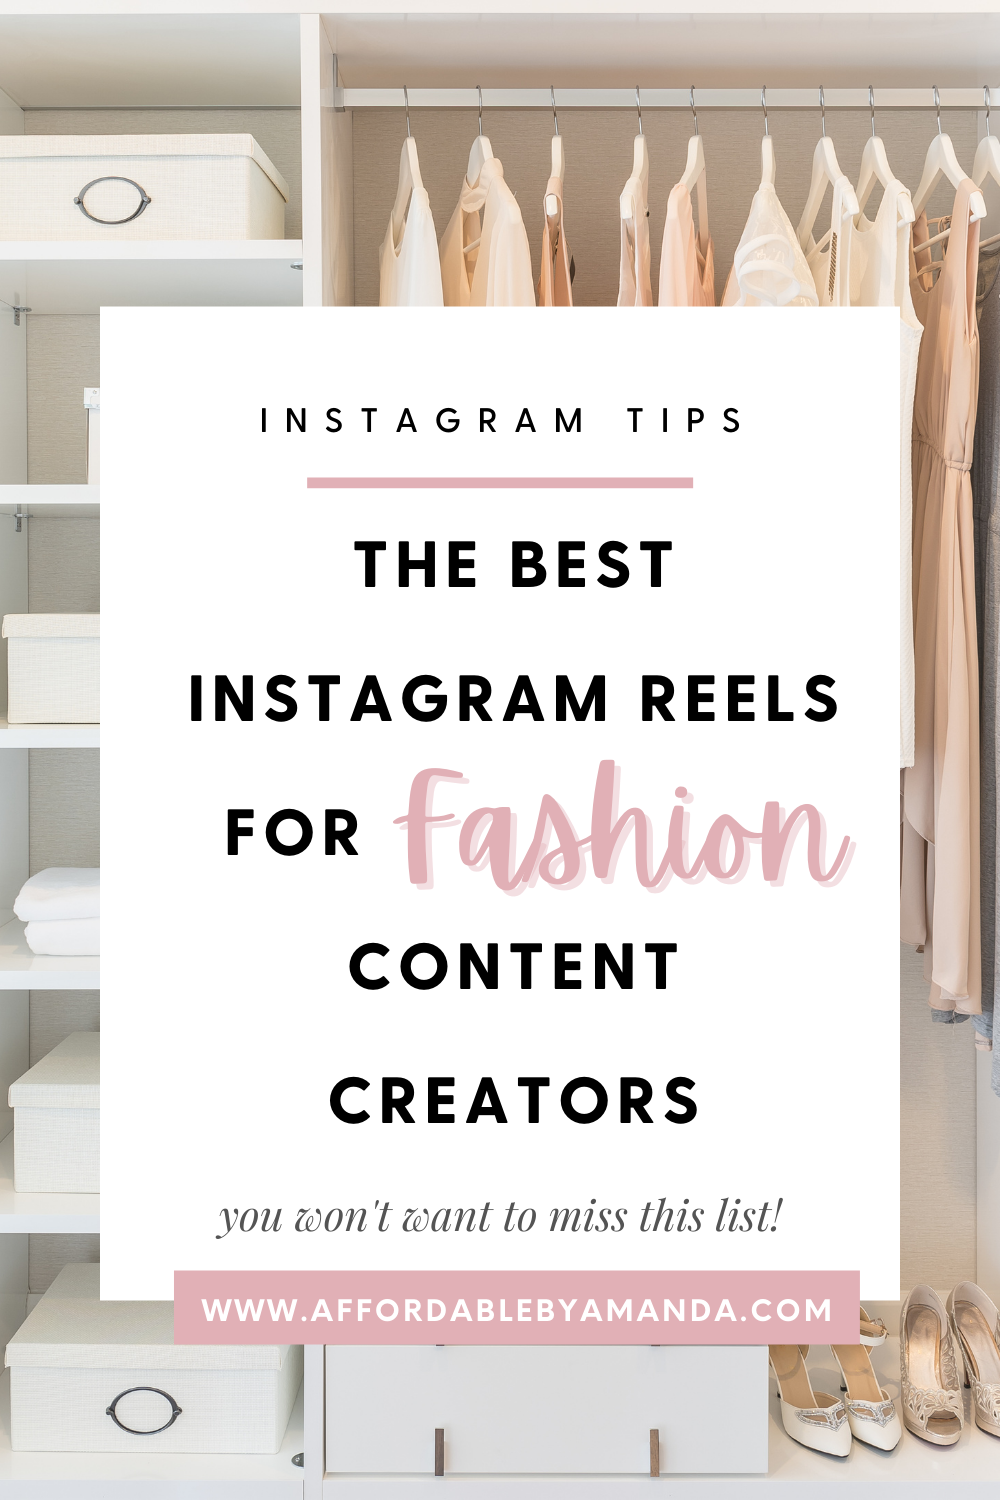 The Best Instagram Reels for Fashion Content Creators - Affordable by Amanda